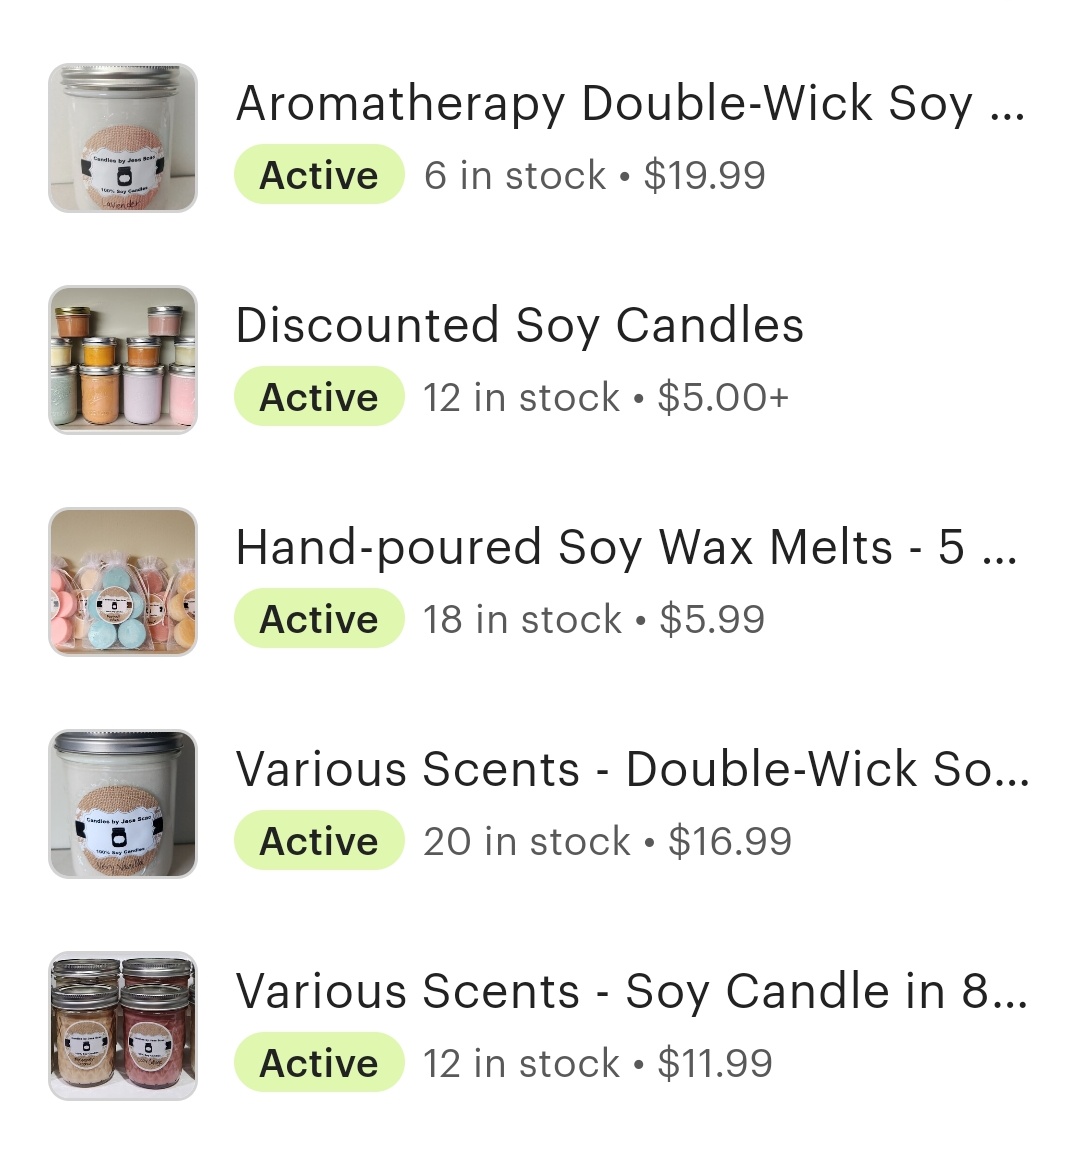 #Subscribe to my Author Newsletter & #Save 15 % at my Candles by Jess Scac Etsy shop. I handpour each of my candles with GB 464 Soy Wax for a clean and long-lasting burn and scent with Premium fragrances or essential oils, giving off a radiant hot throw. author-jessica-scachetti.mailerpage.io